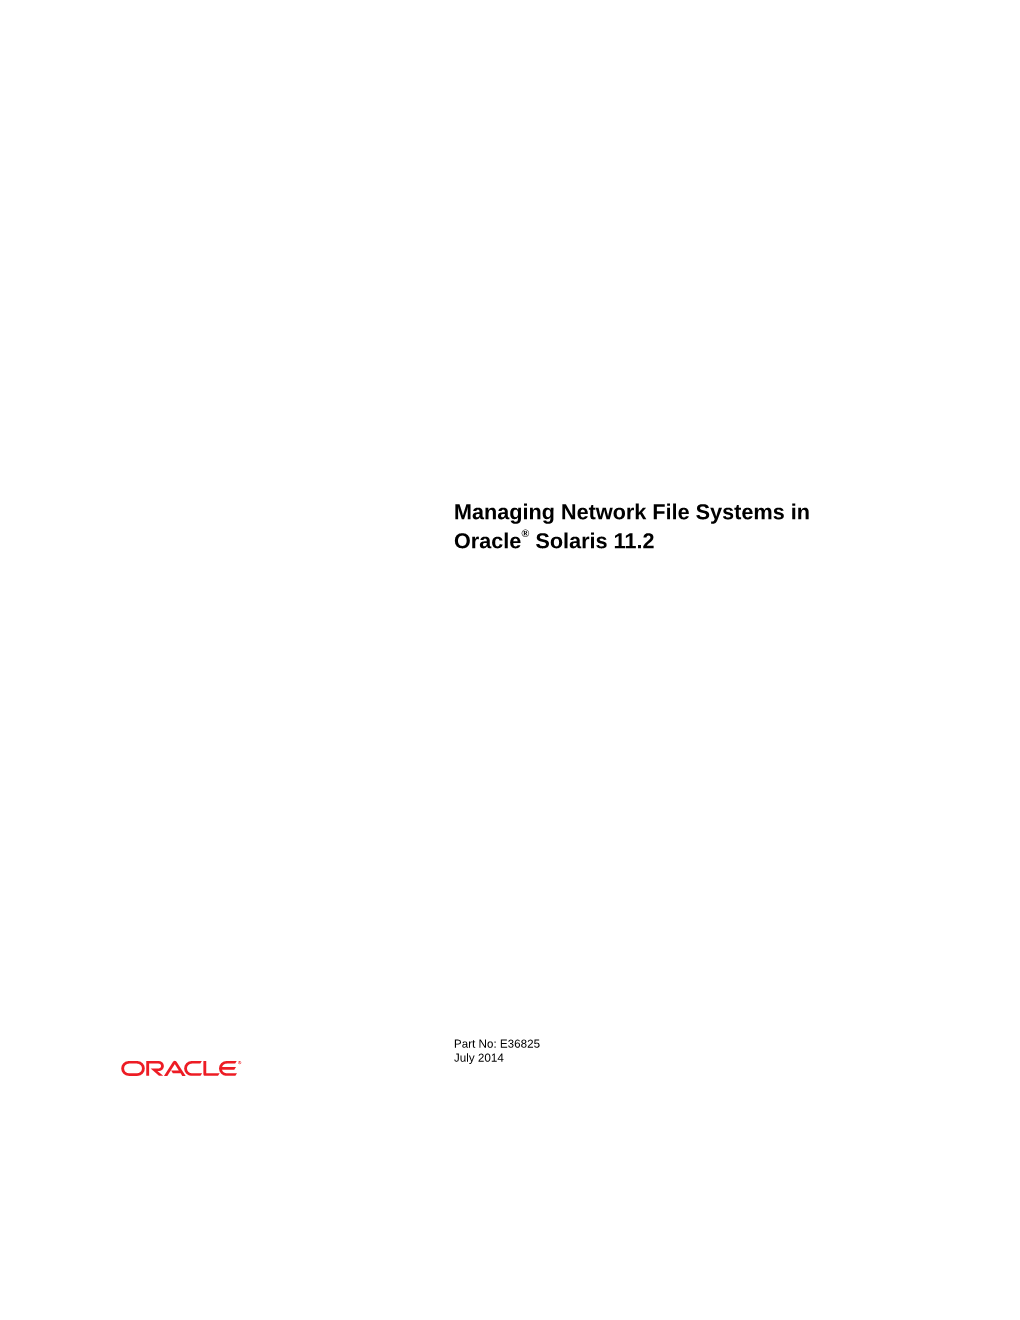 Managing Network File Systems in Oracle® Solaris 11.2